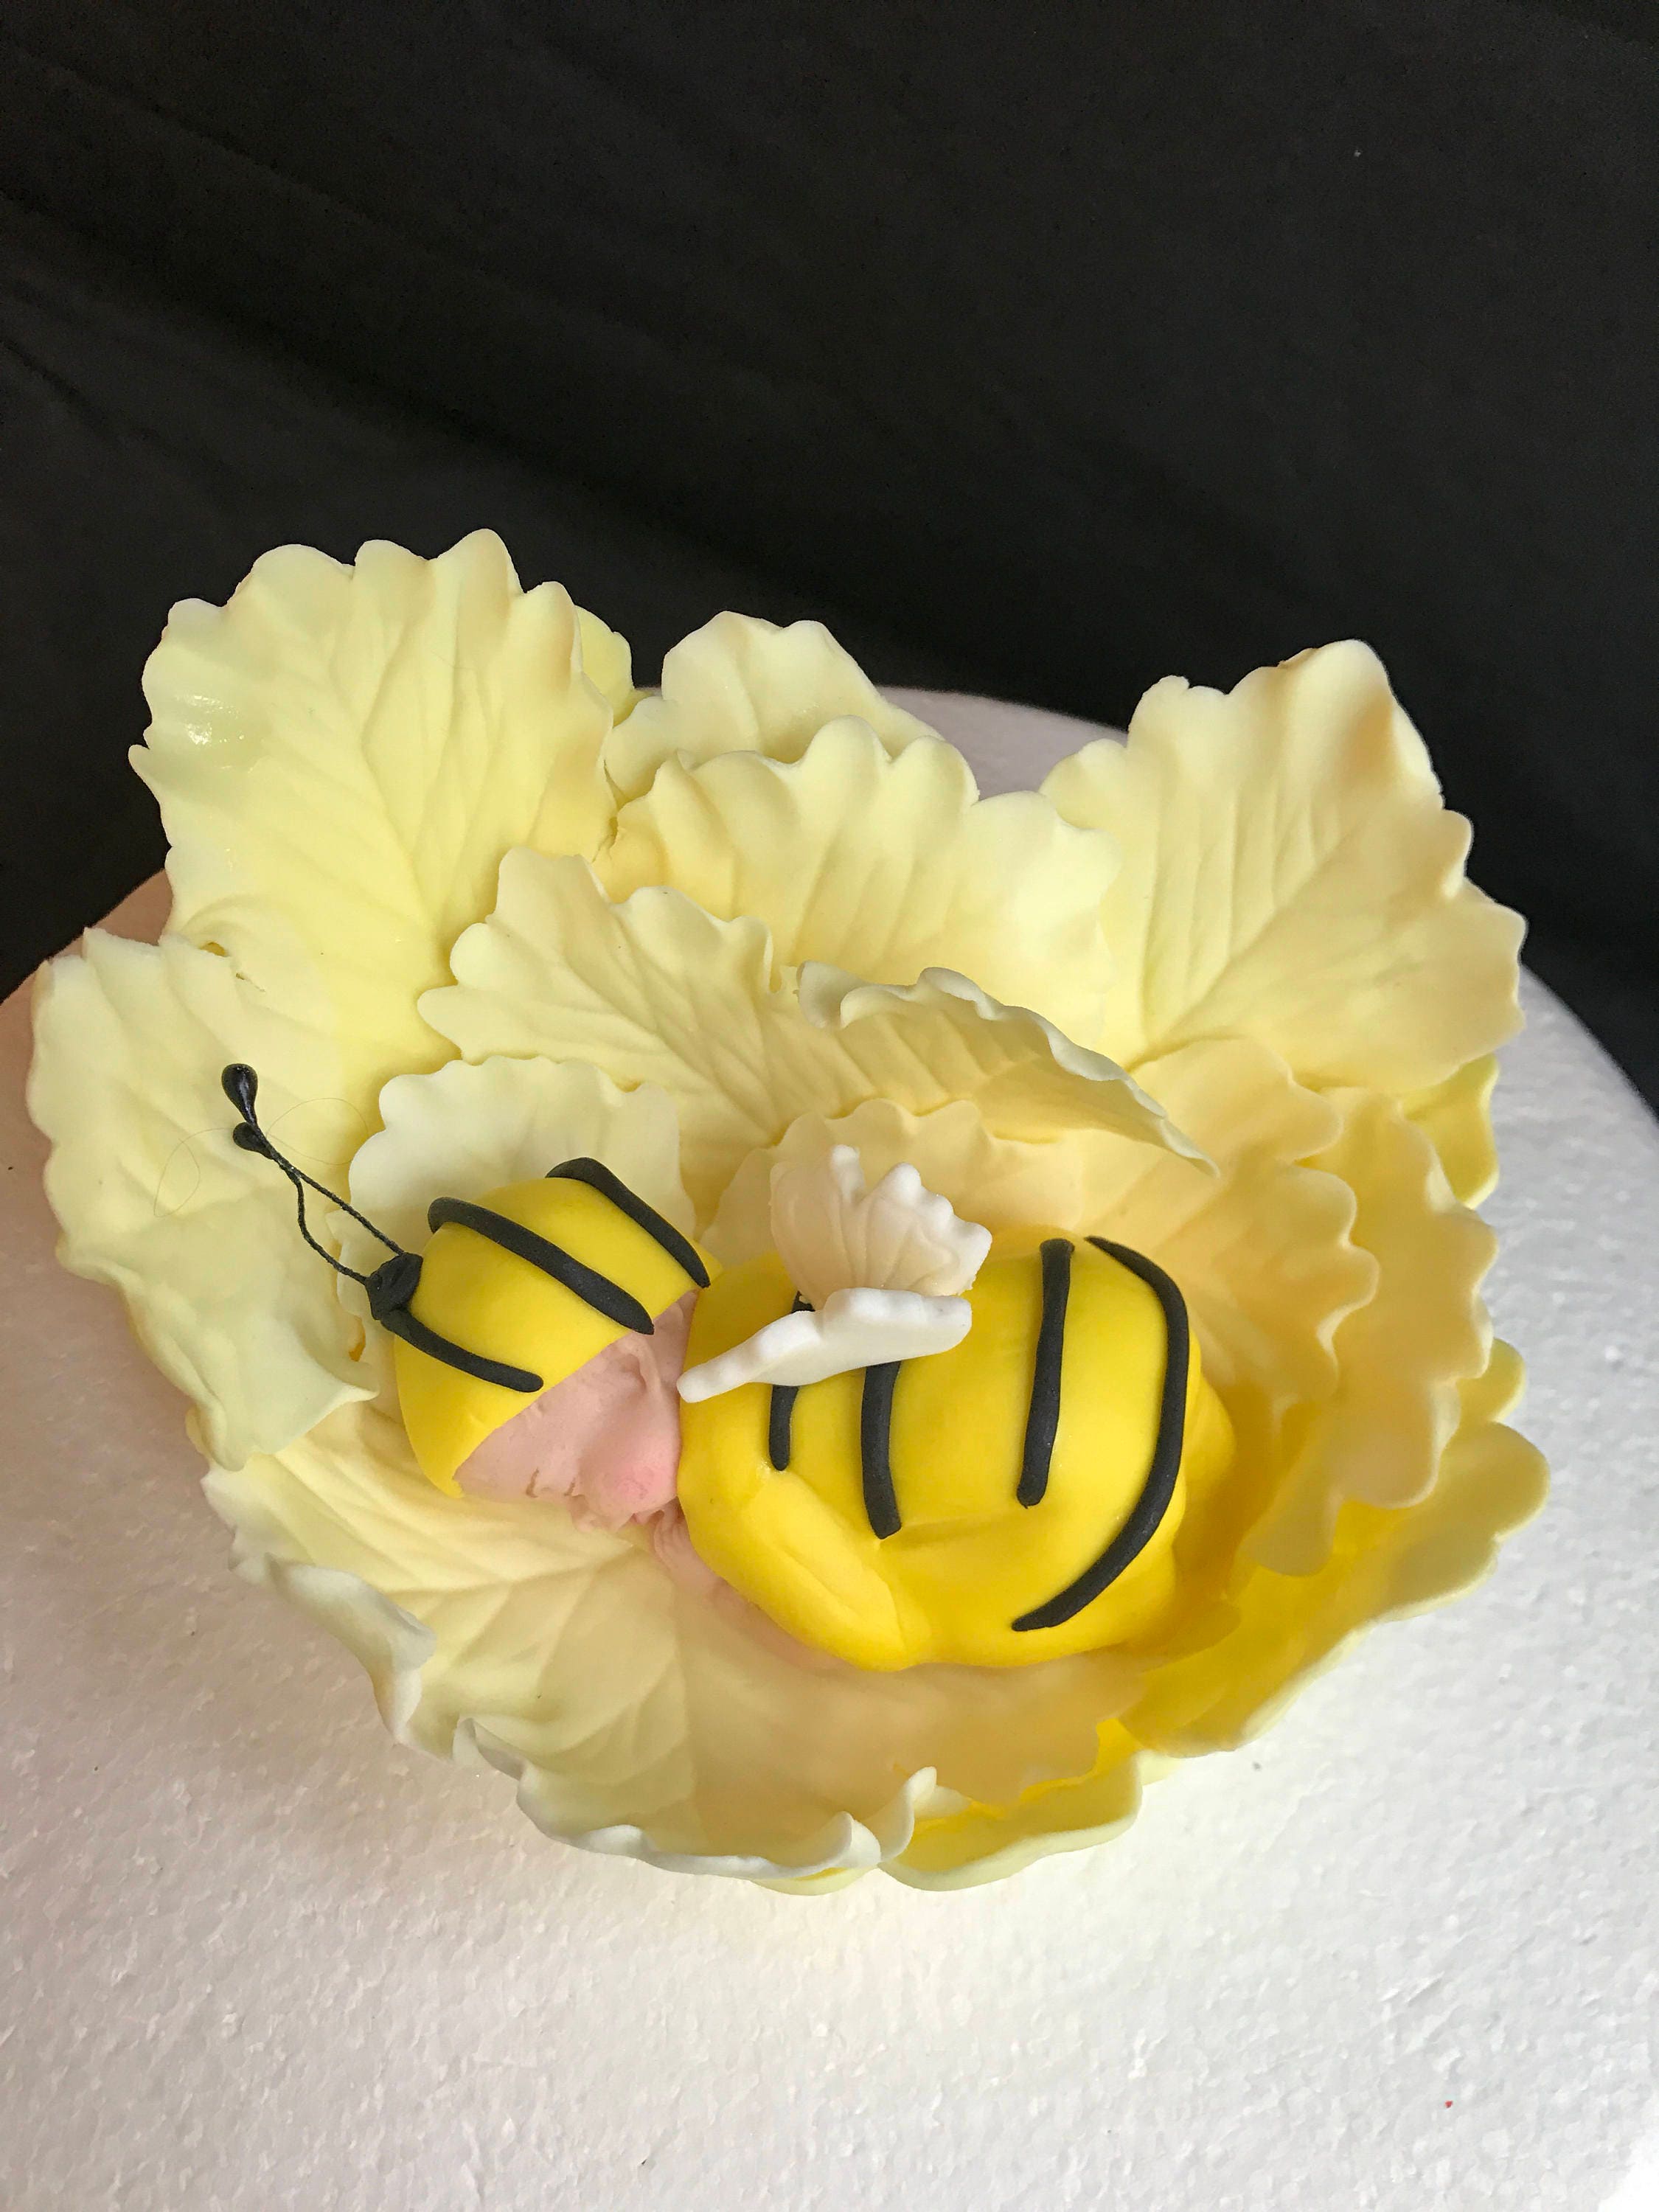 Bees Cakes Decorations- Bumble Bee Shaped Edible Hard Sugar Decorations, 48  pcs by RUS Candy Company